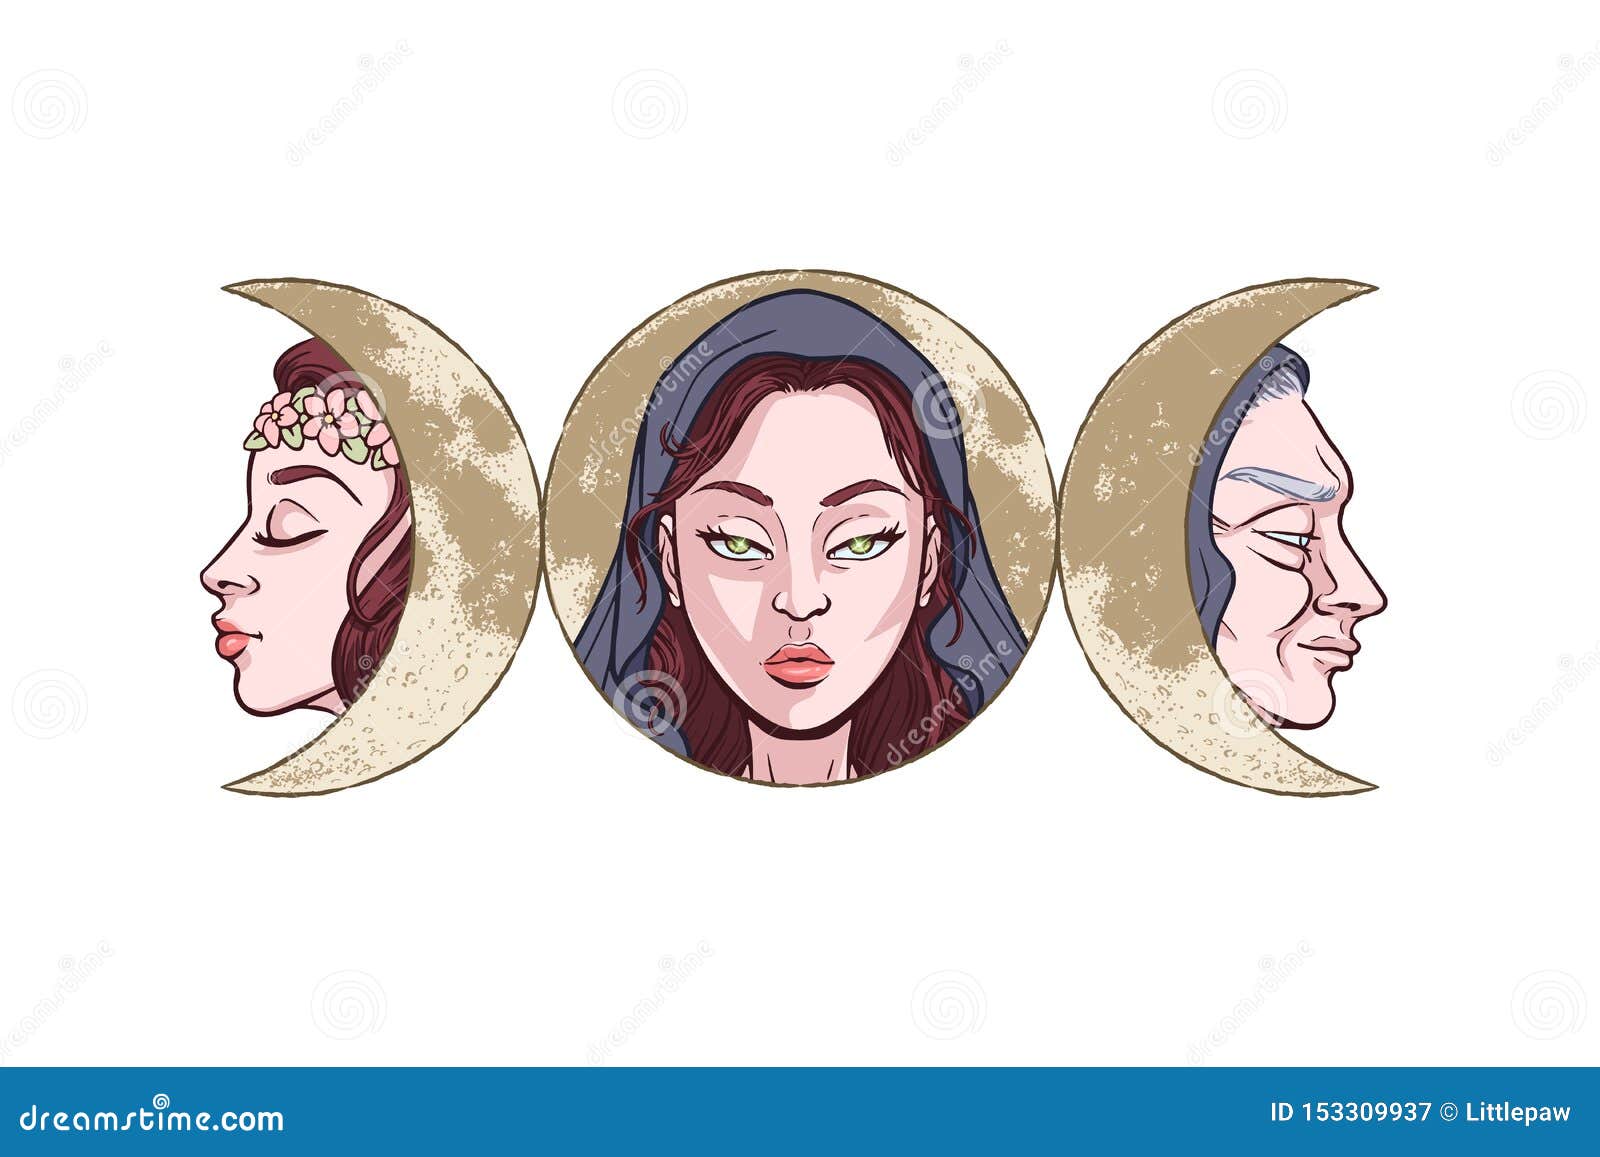 triple goddess as maiden, mother and crone, beautiful woman,  of moon phases. hekate, mythology, wicca, witchcraft. 